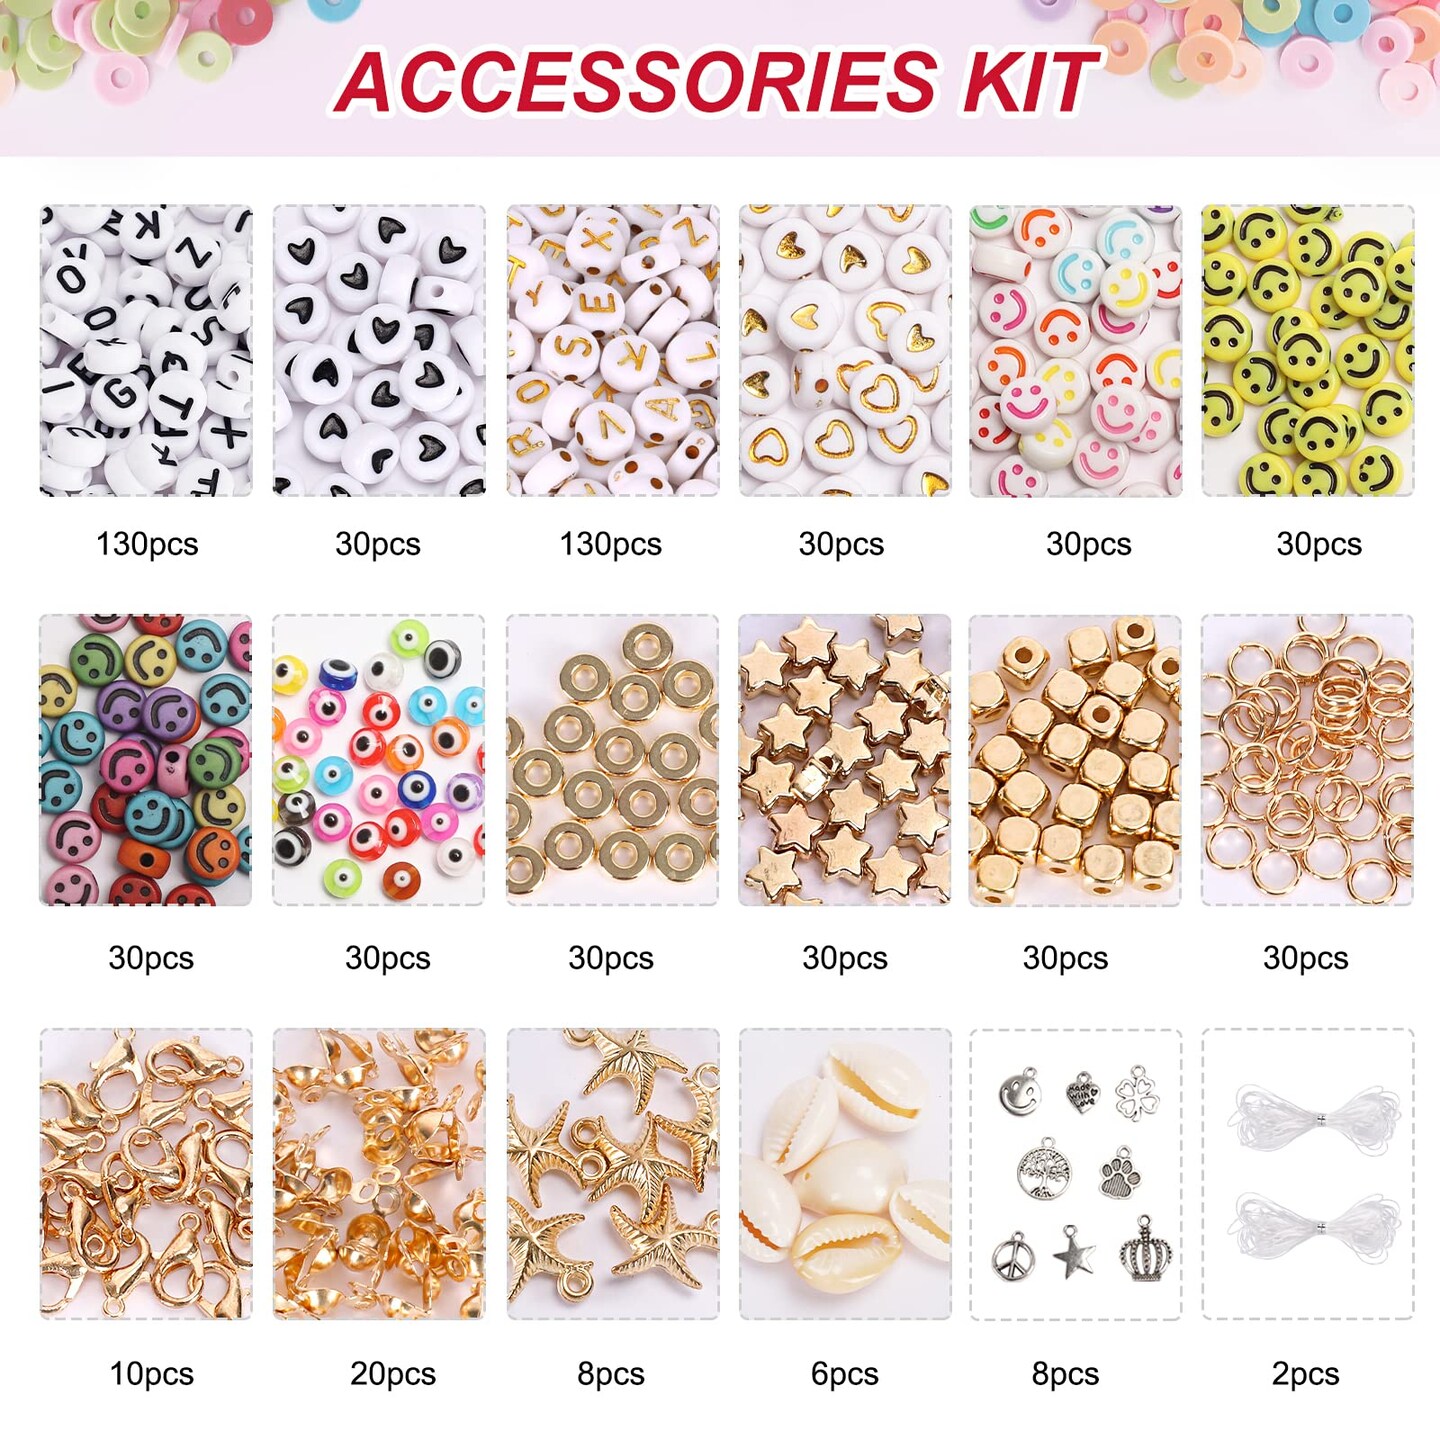 QUEFE 10800pcs Clay Beads for Bracelet Making Kit, 108 Colors Polymer Heishi Beads for Girls 8-12, Letter Beads for Jewelry Making Kit, for Preppy, Gifts, Crafts